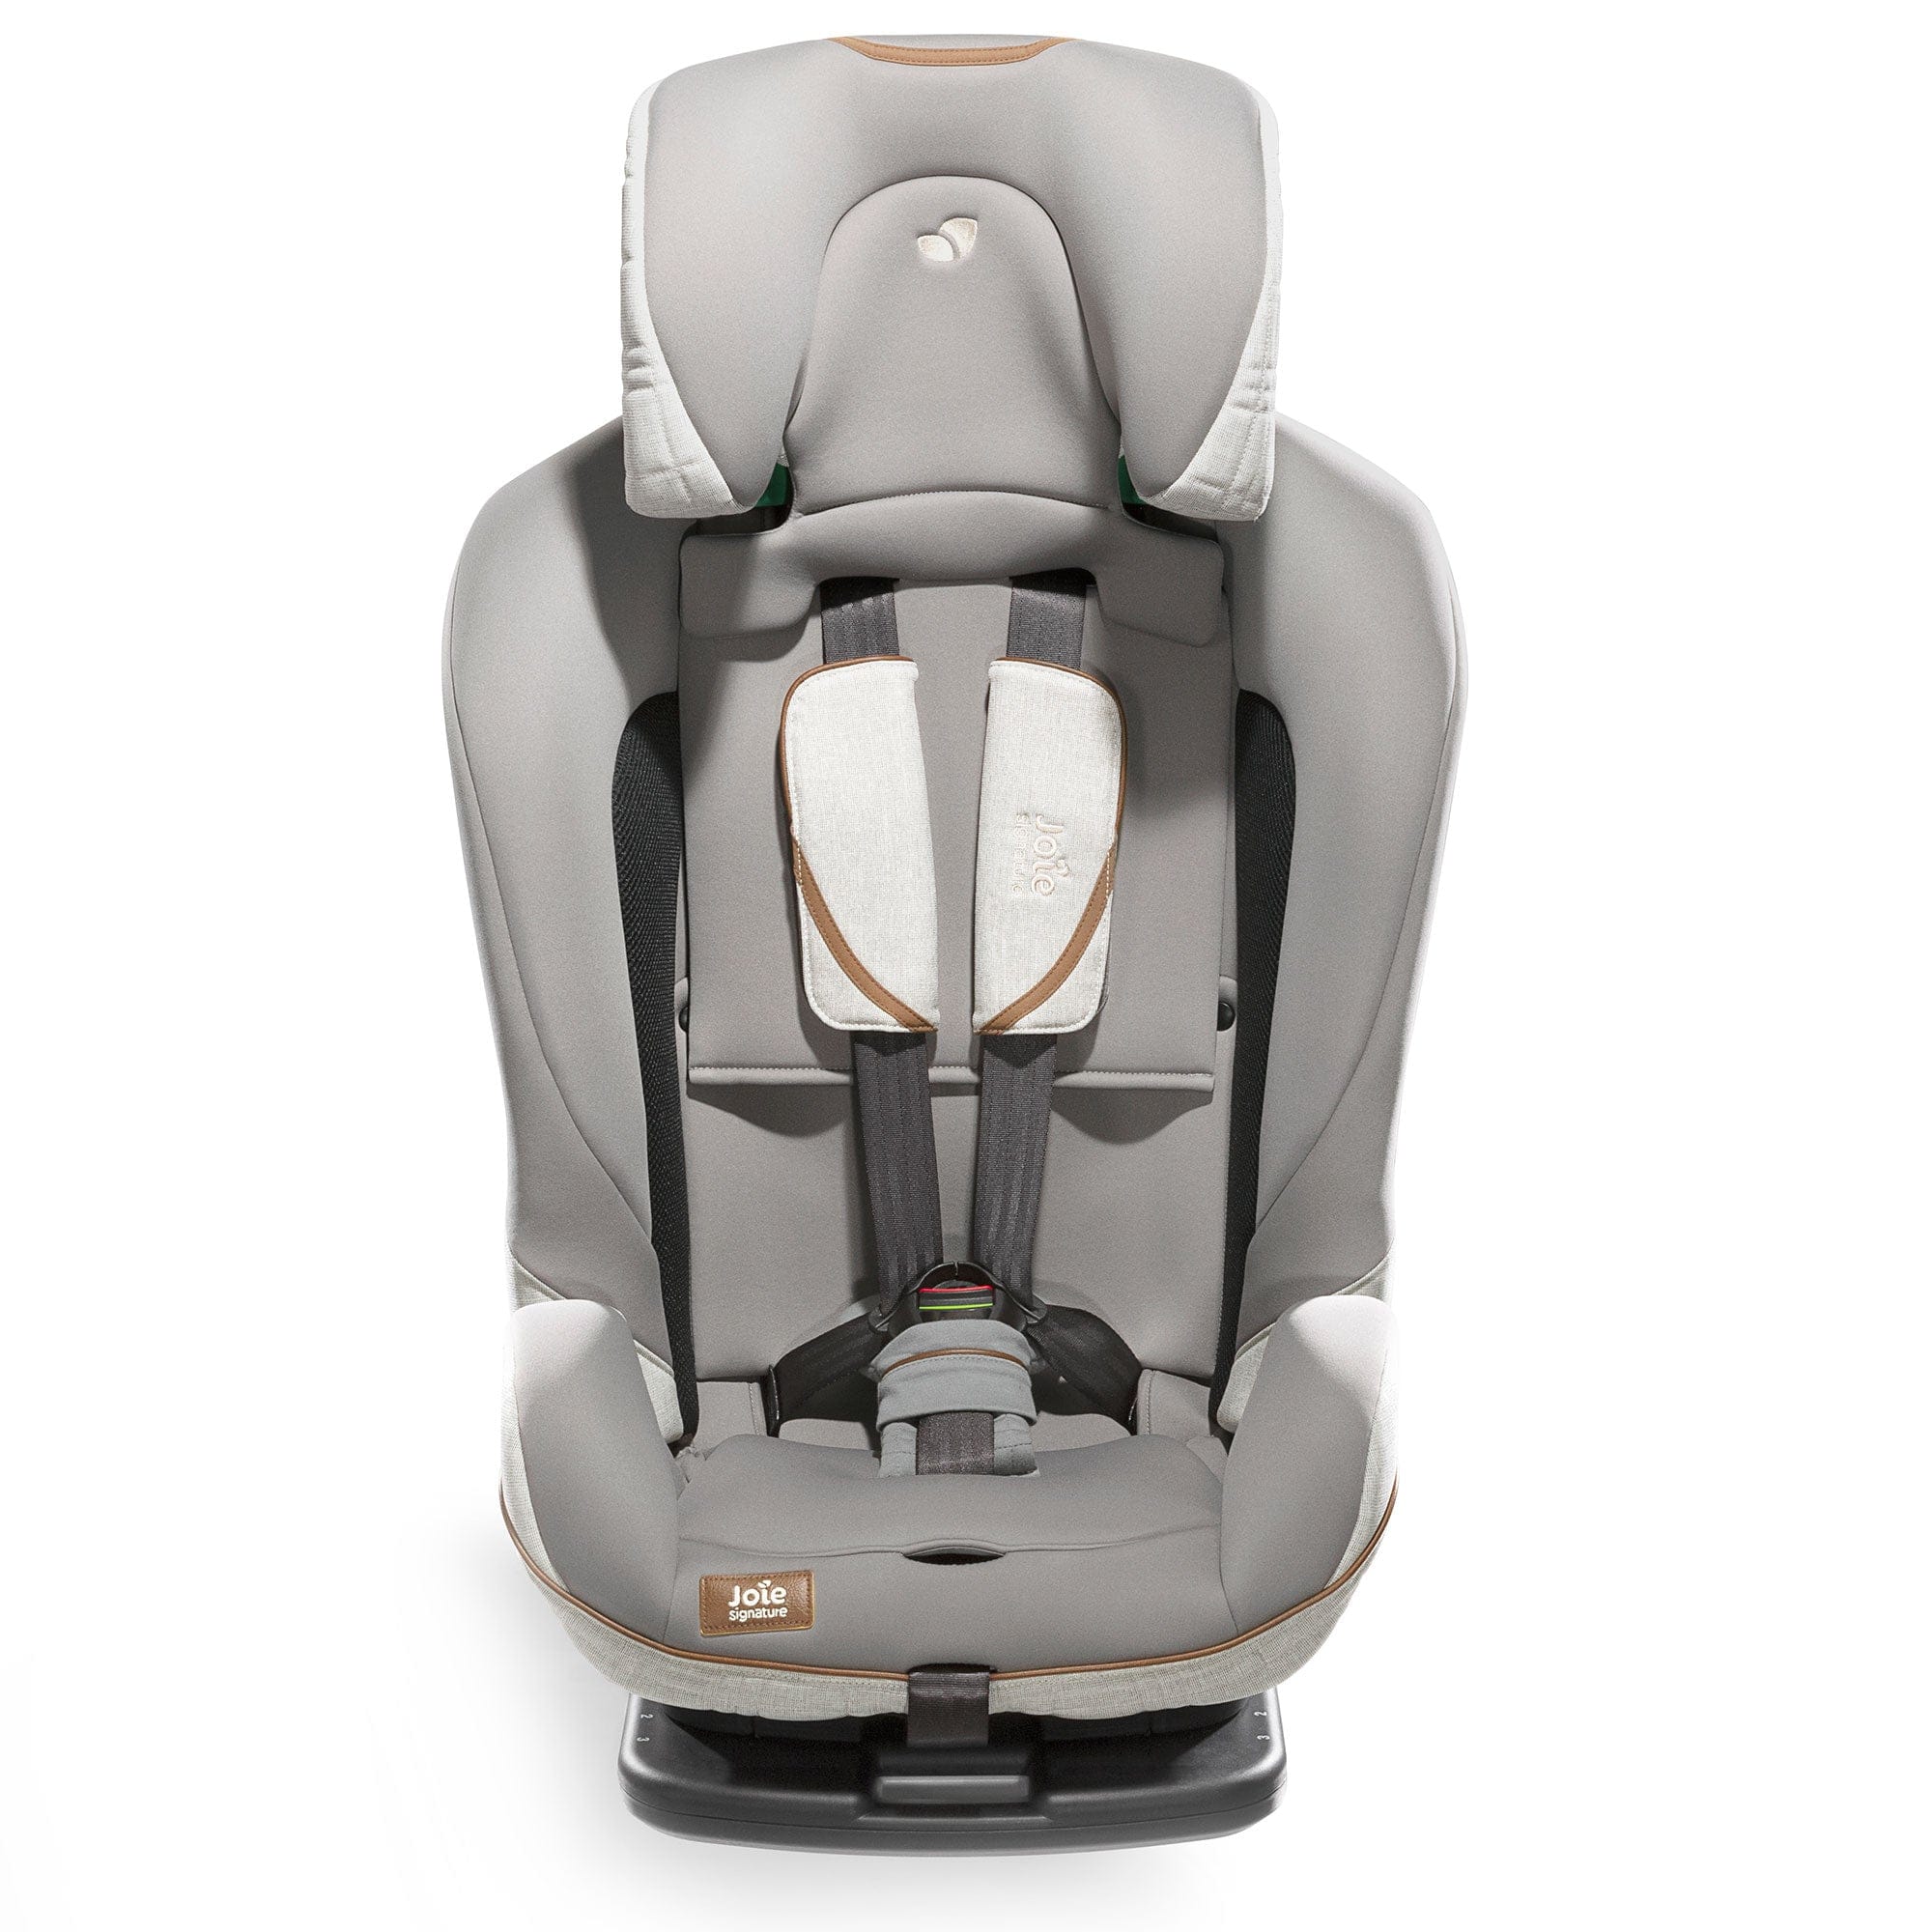 Copy of Joie i-Plenti Signature Car Seat in Oyster Toddler Car Seats